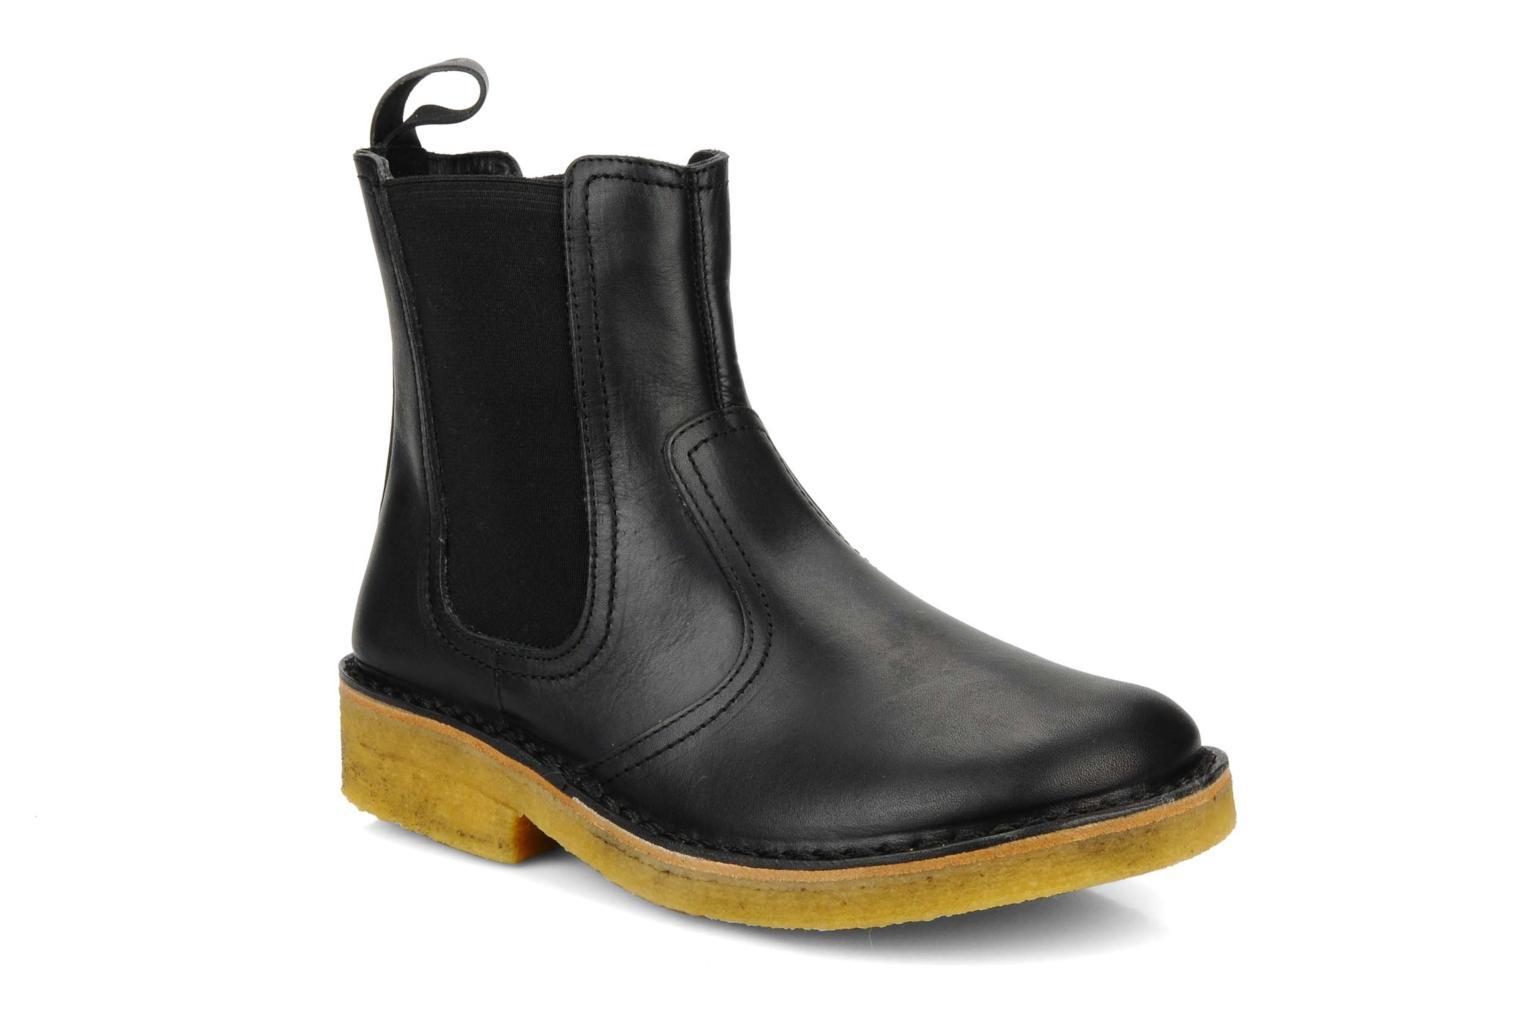 Foto Boots y Botines Swedish Hasbeens Chelsea boot femme Mujer